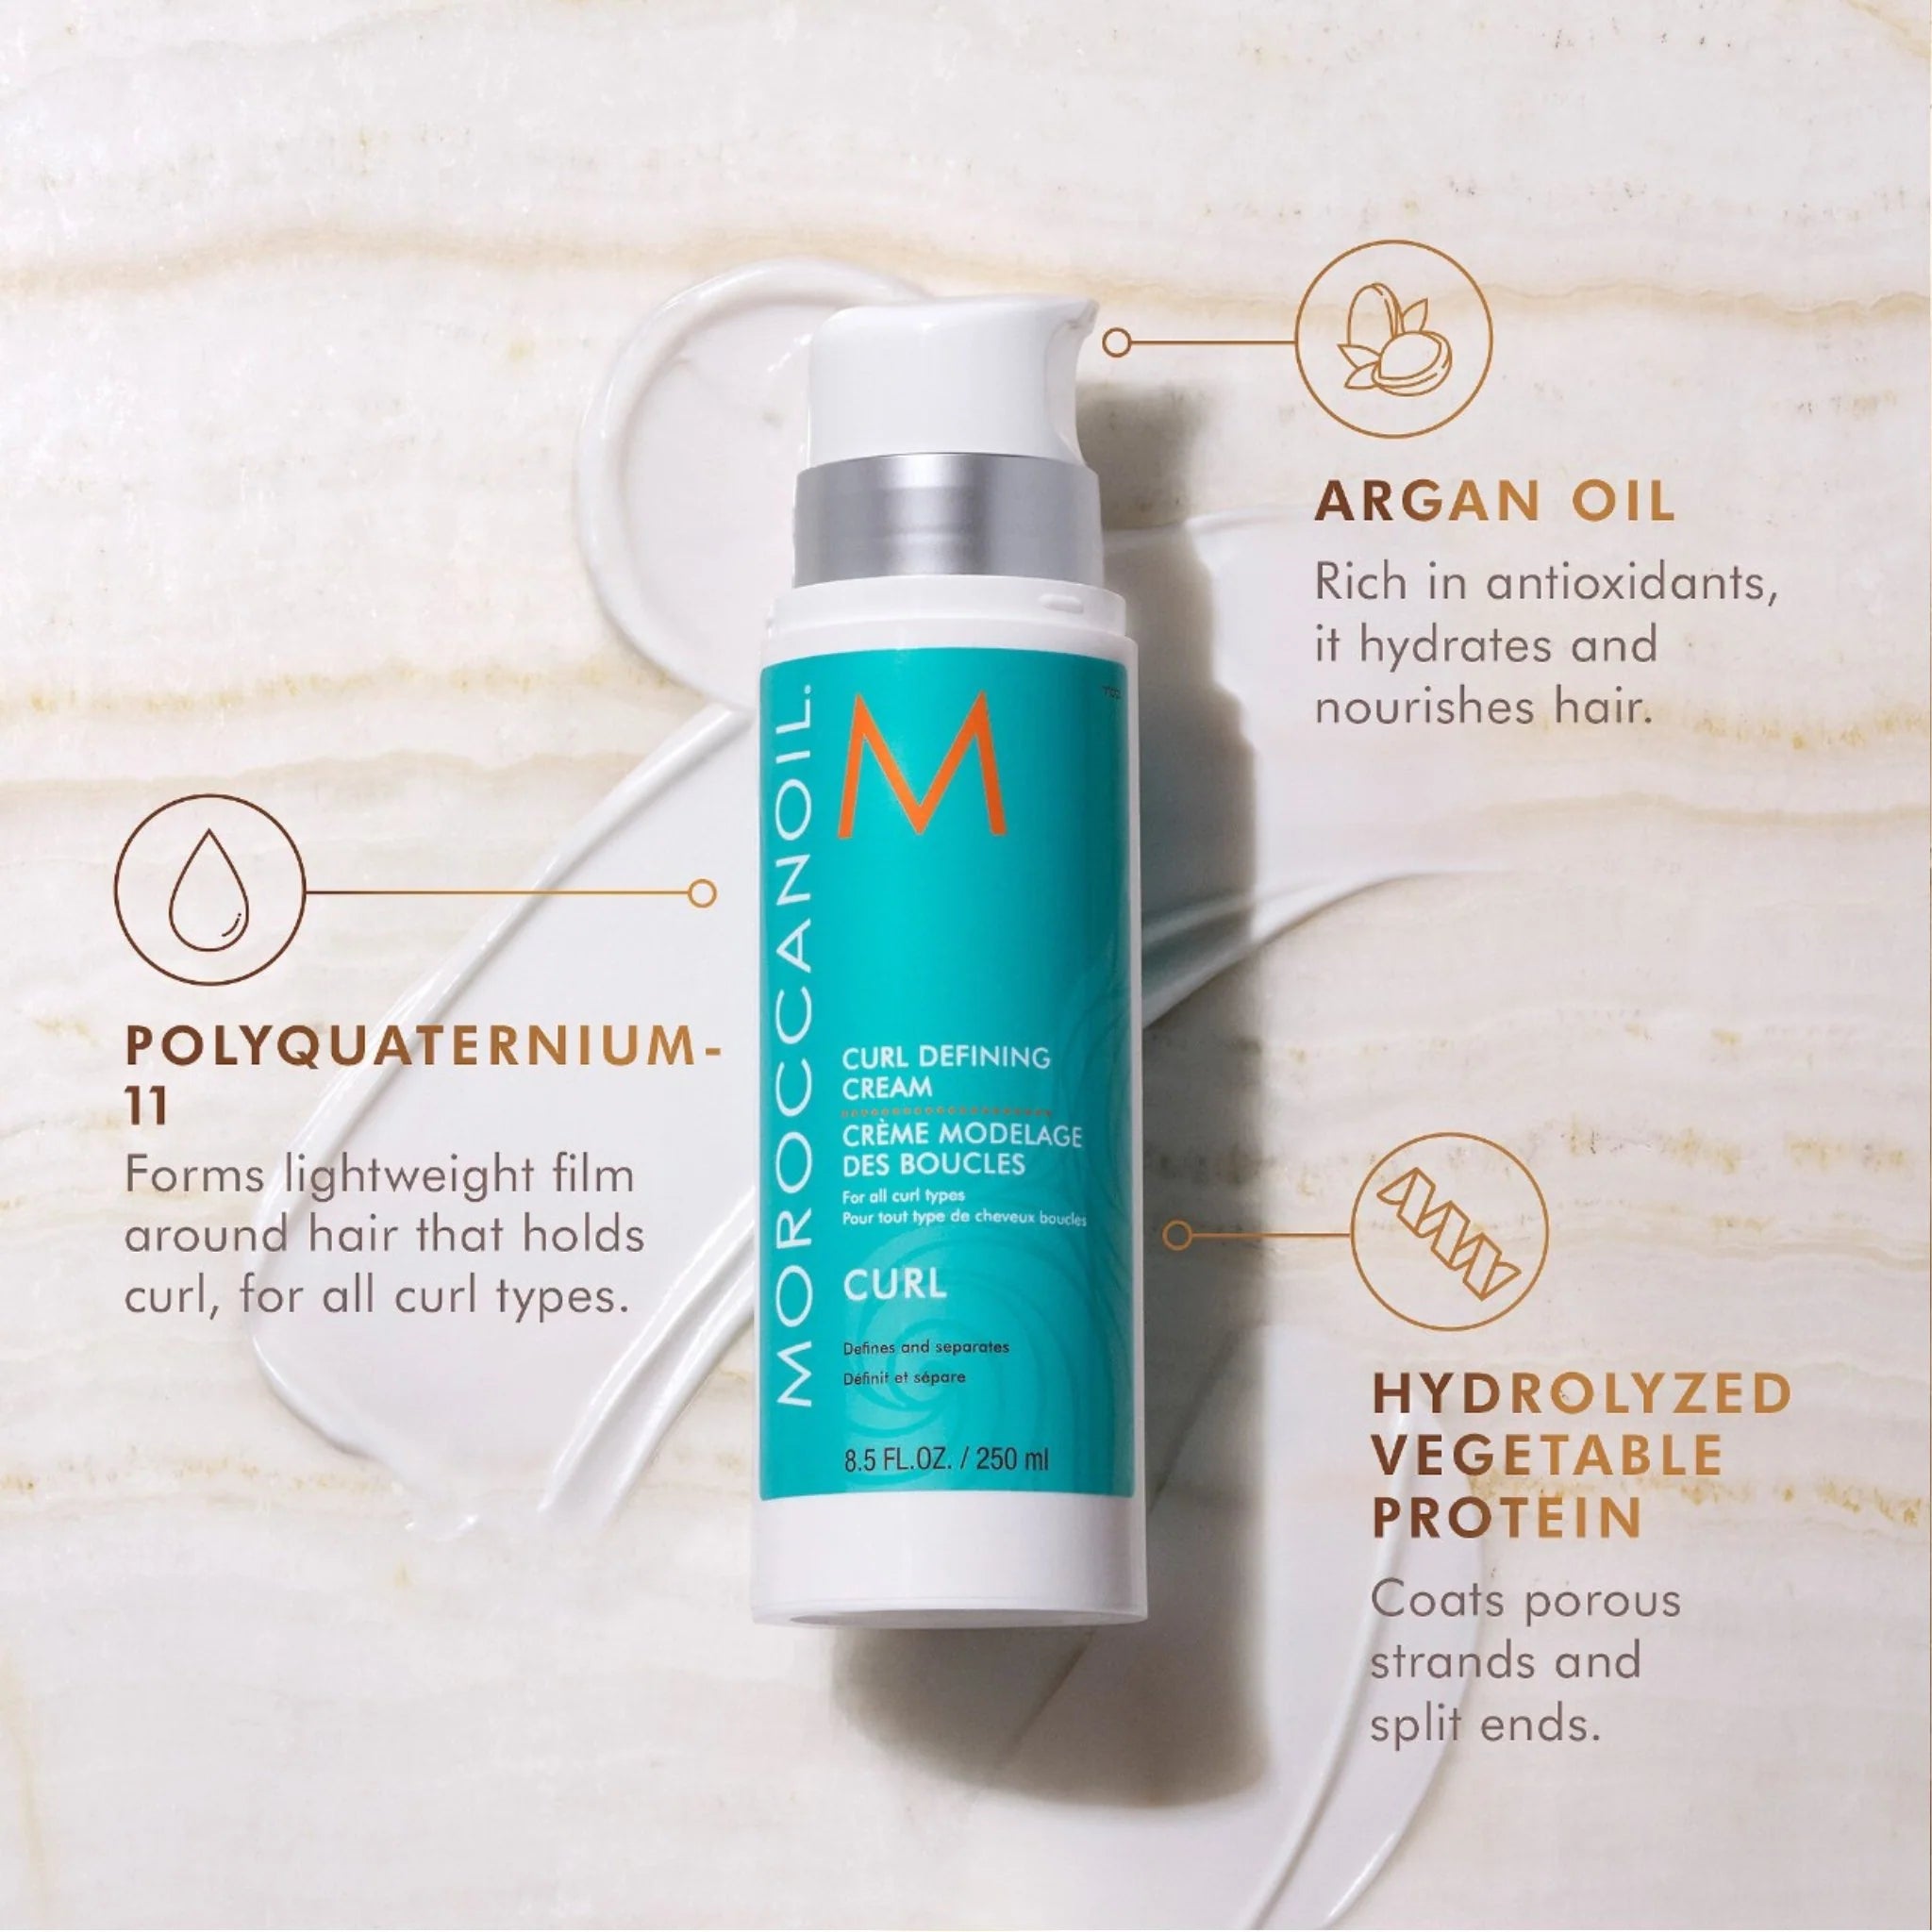 Styling cream by MoroccanOil (MoroccanOil Curl Defining Cream)